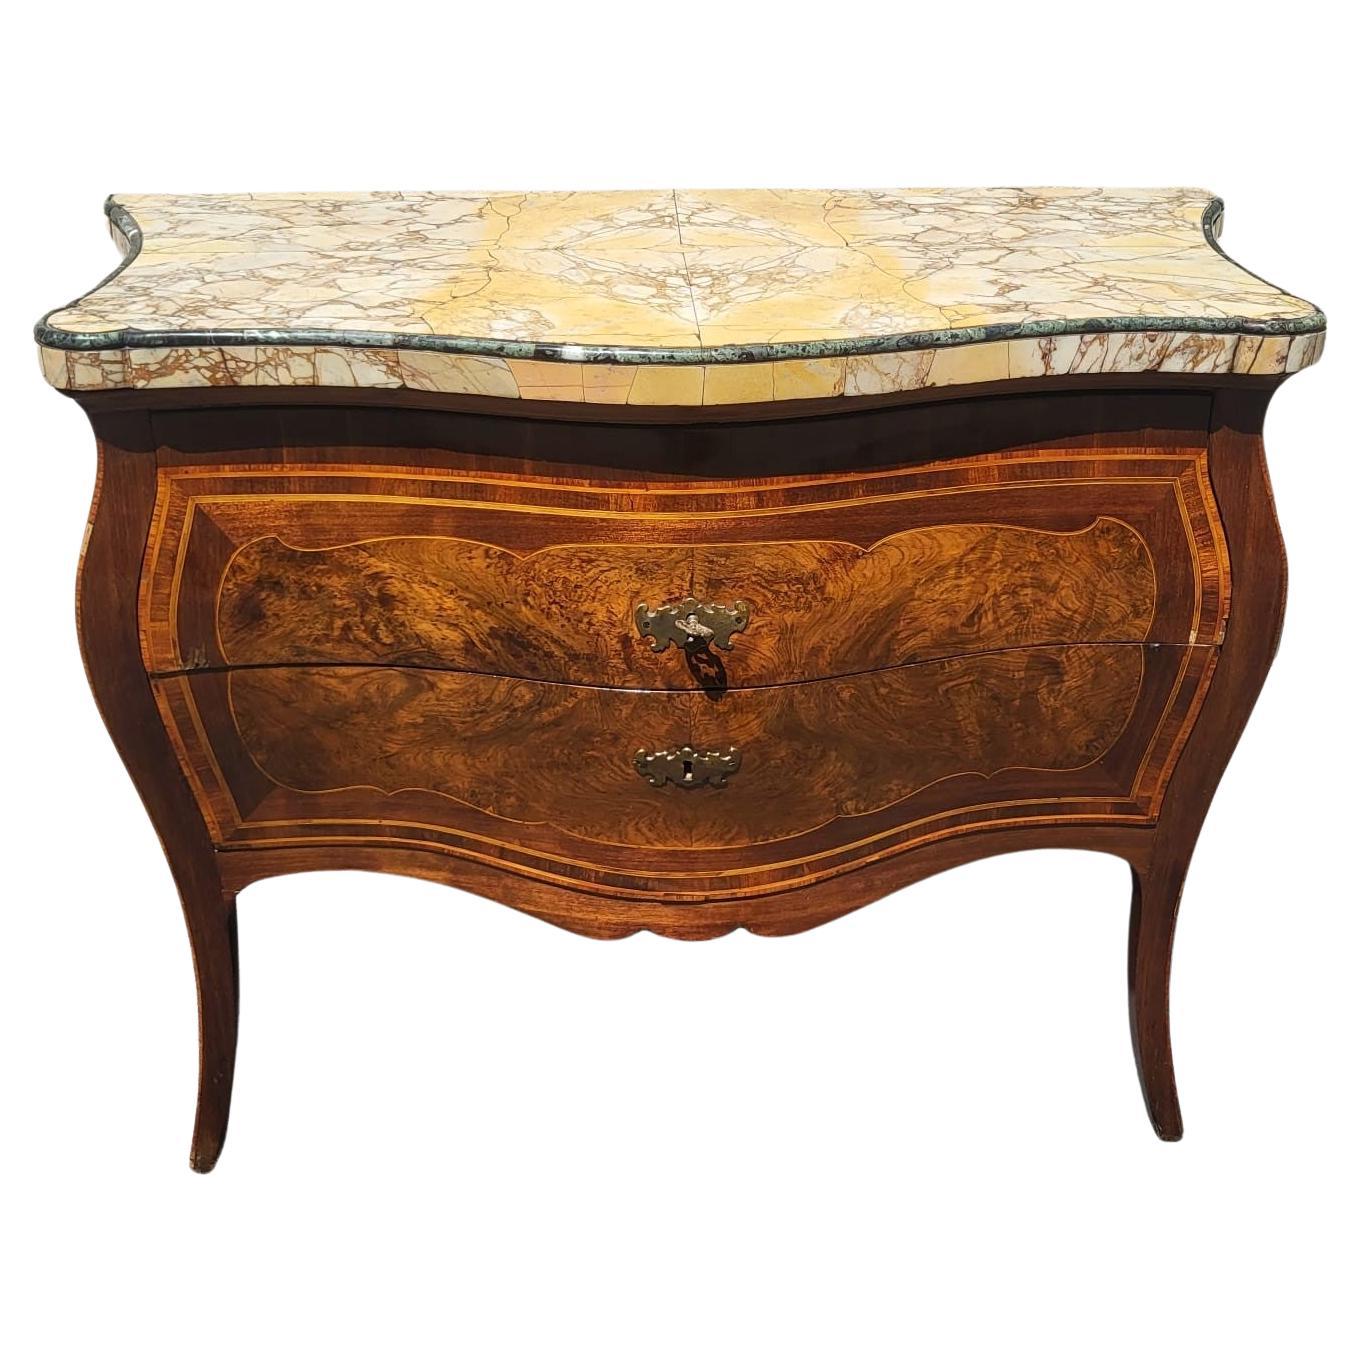 Beautiful Roman Marquetry Commode, 18th Century Period